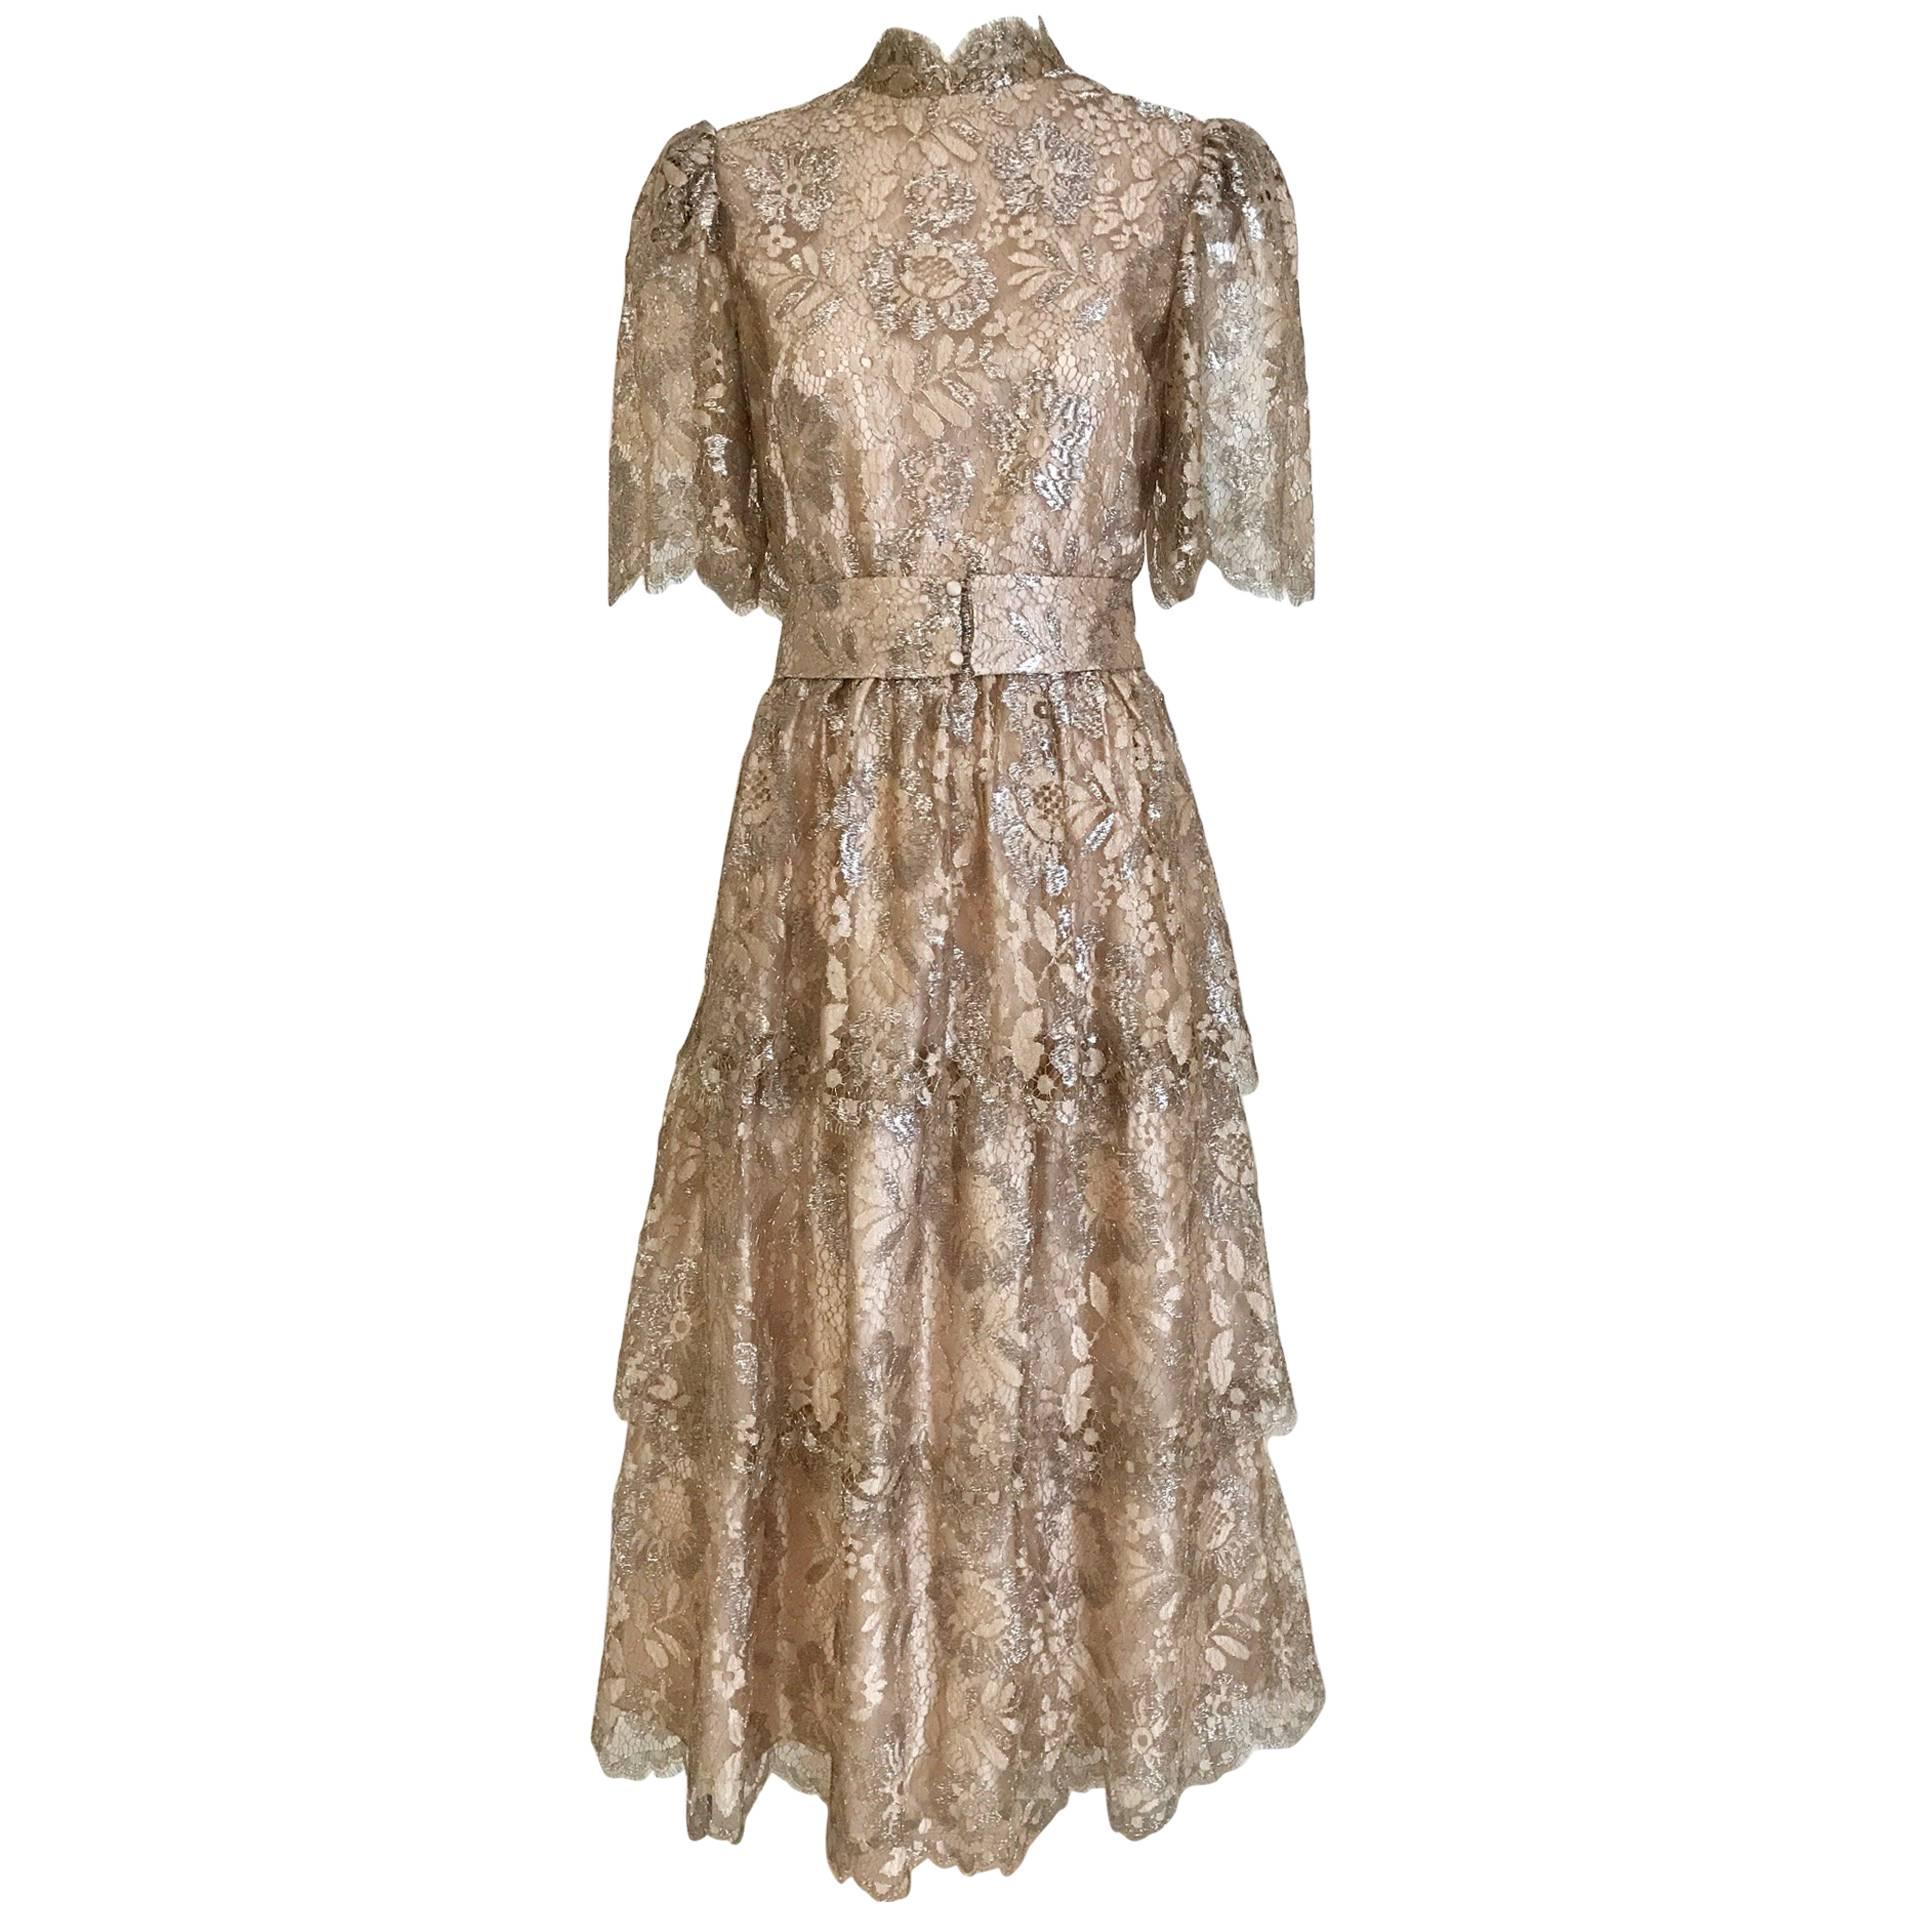 1970s Metalic Lace Cocktail Dress